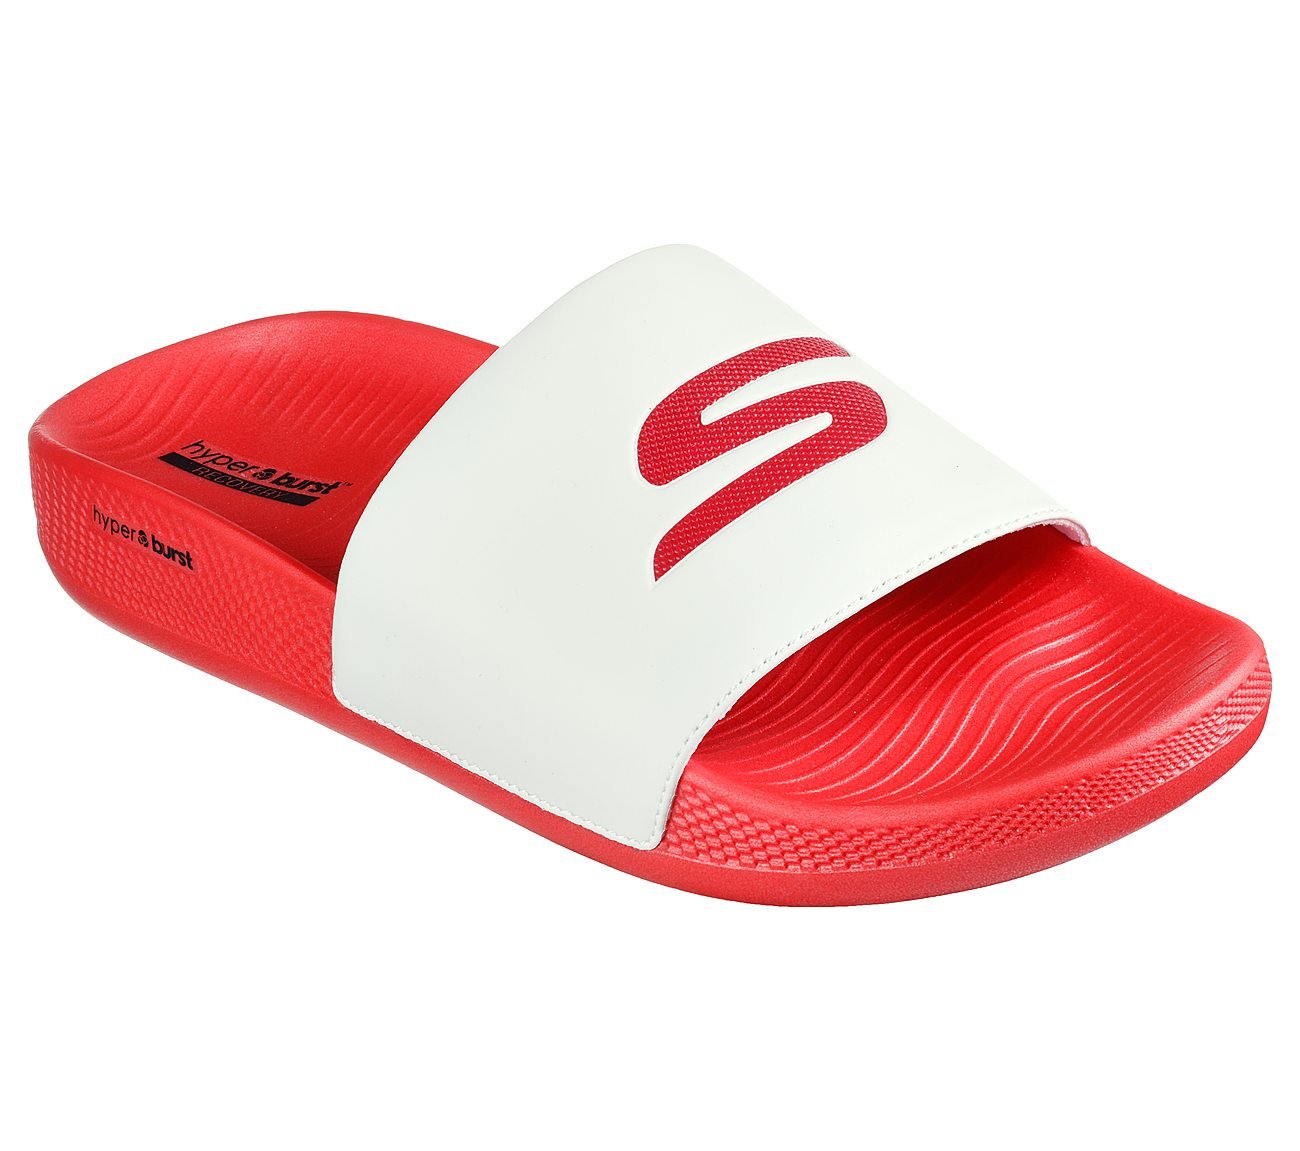 HYPER SLIDE - DERIVER, WHITE/RED Footwear Lateral View